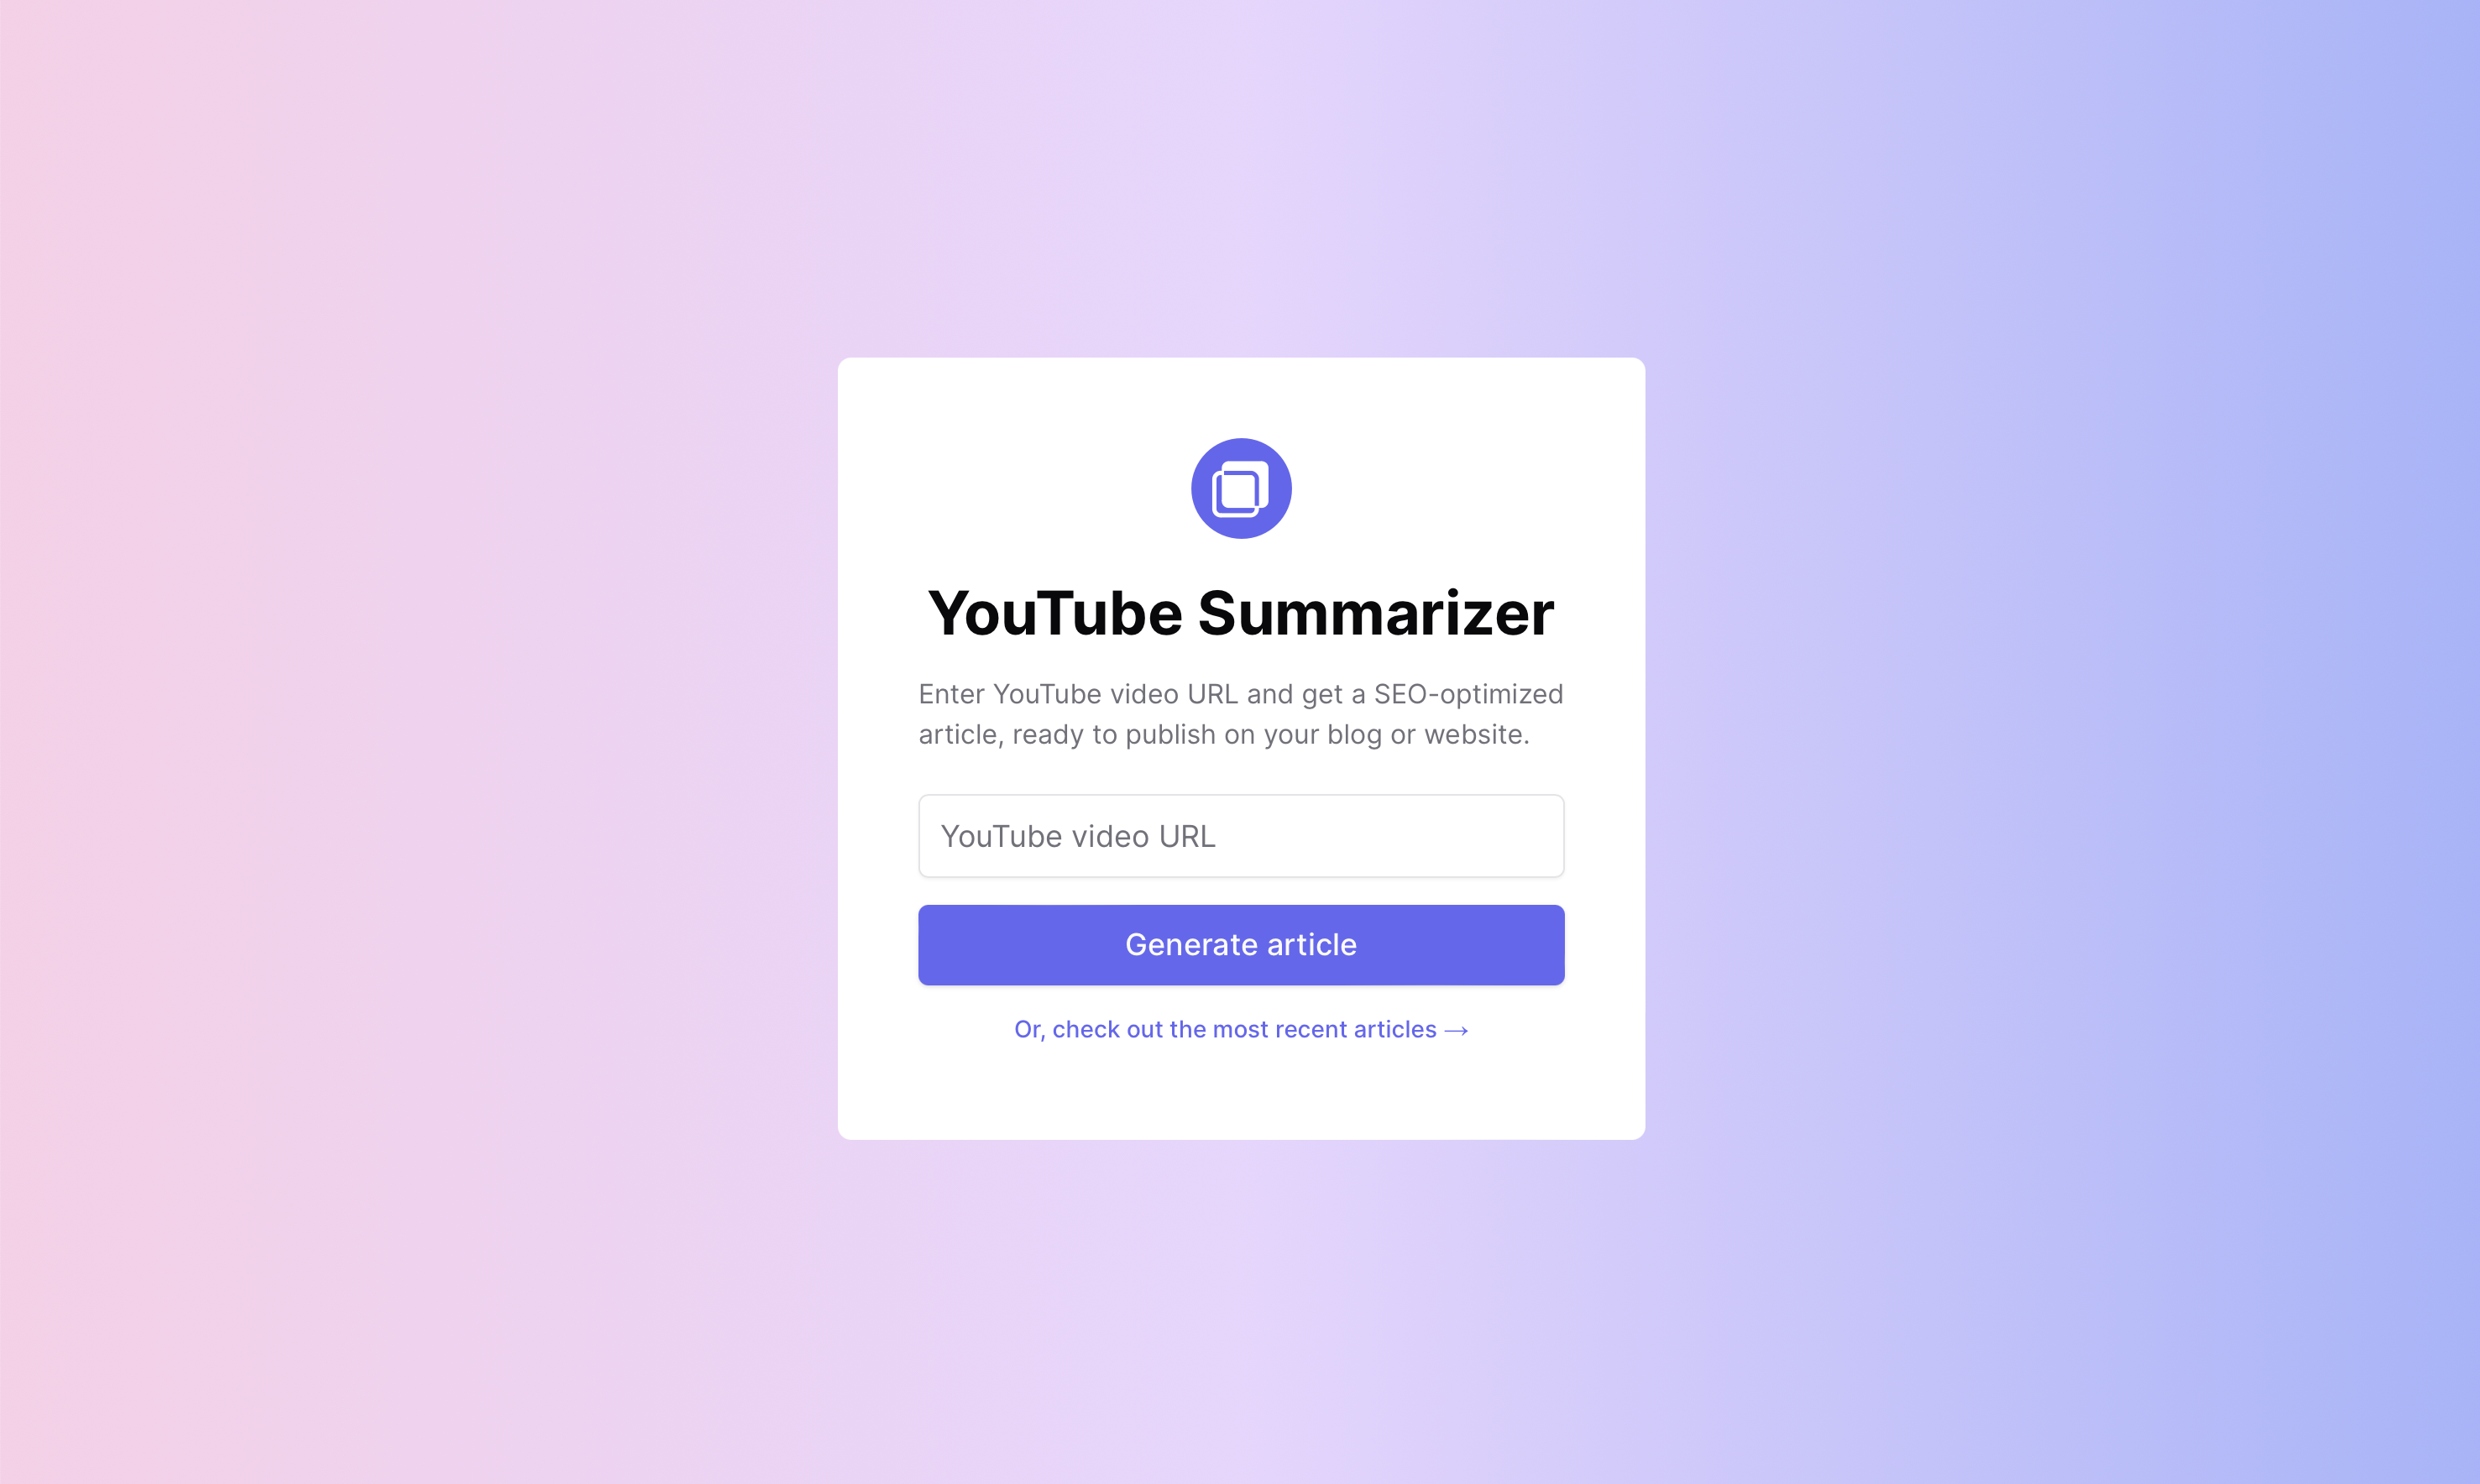 youtube-summarizer - Turn a YouTube video into an SEO-optimized article